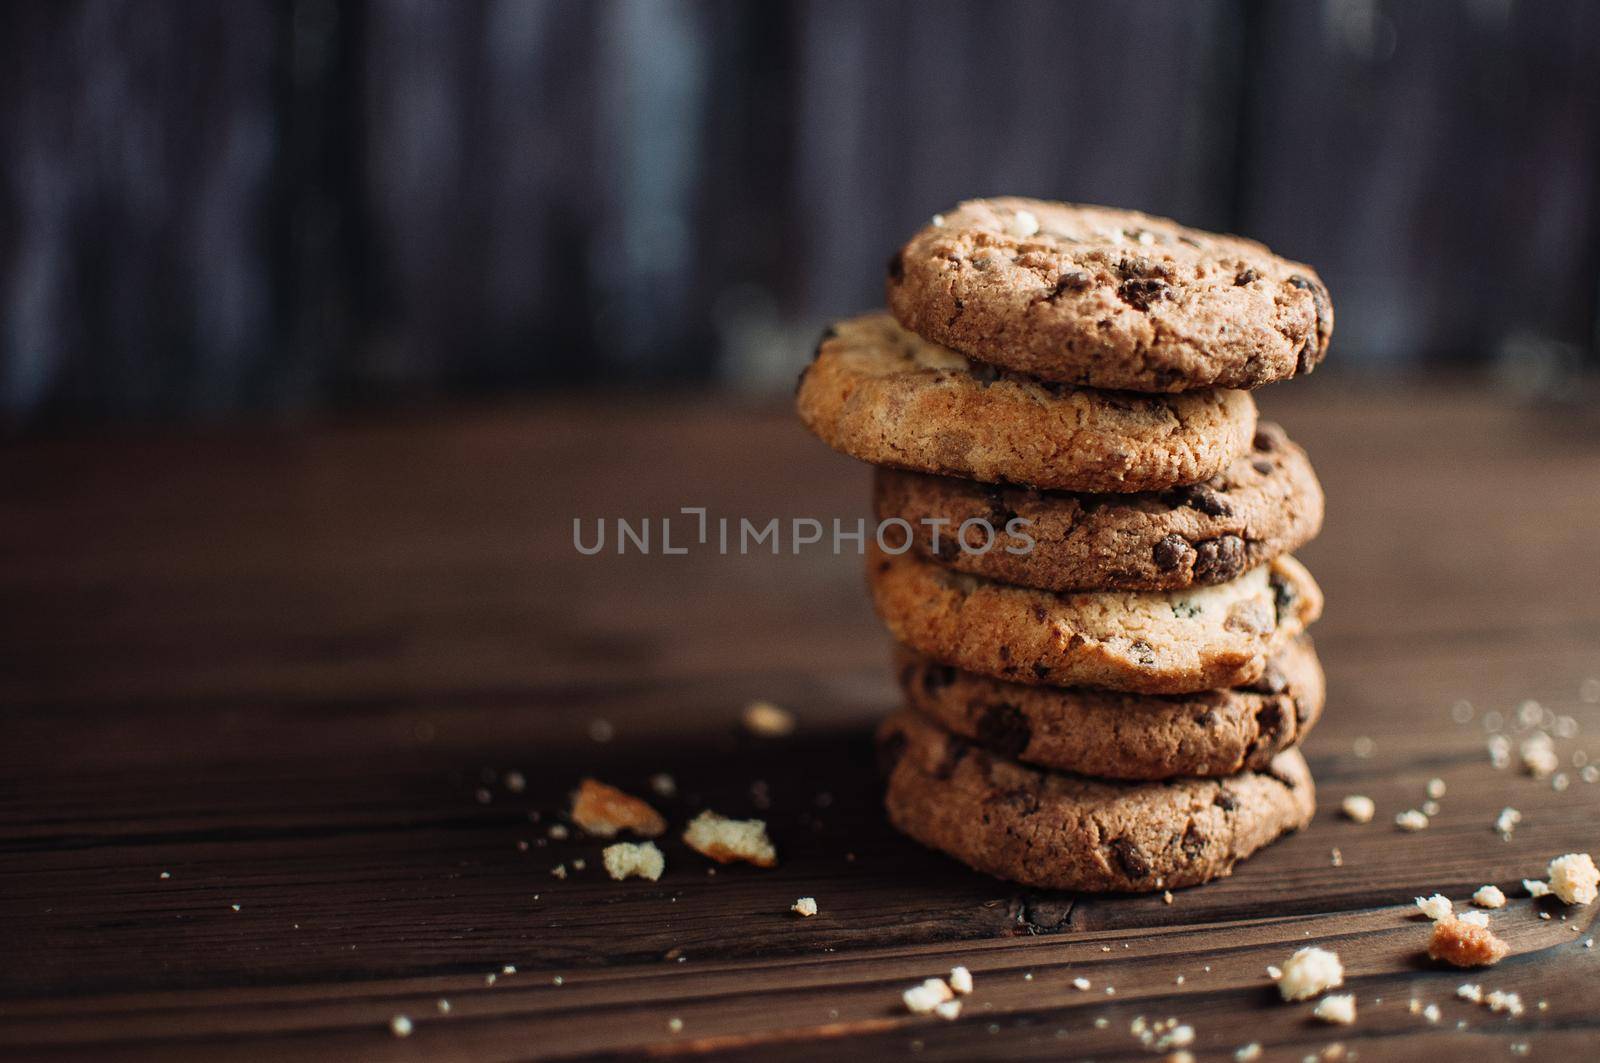 Cookies with chocolate worth a stack on a wooden table in a rustic style. Crumbs from biscuits on wooden boards. Selective focus